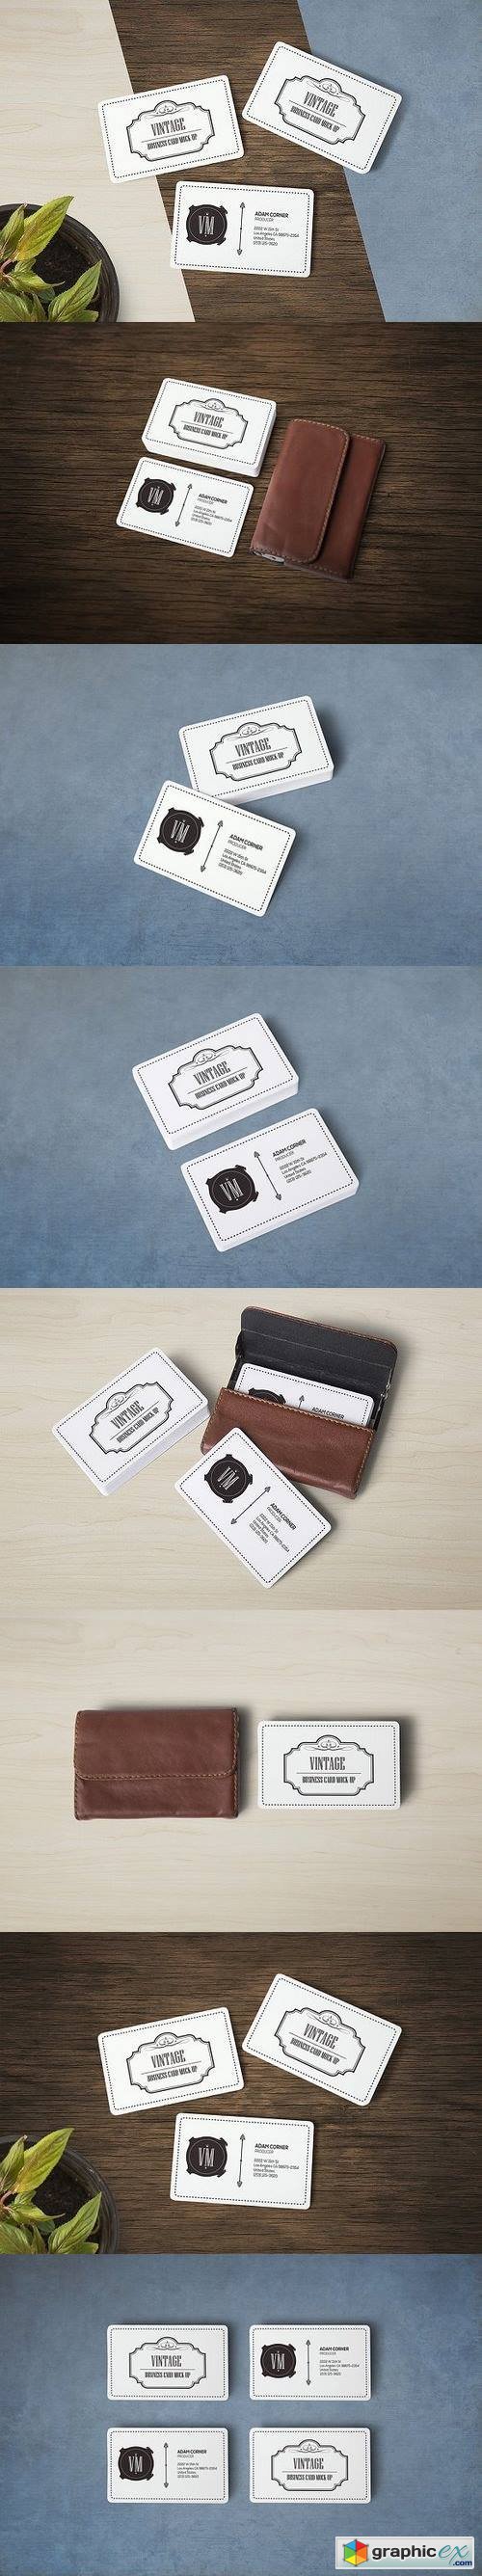 Rounded Corners Business Card mockup